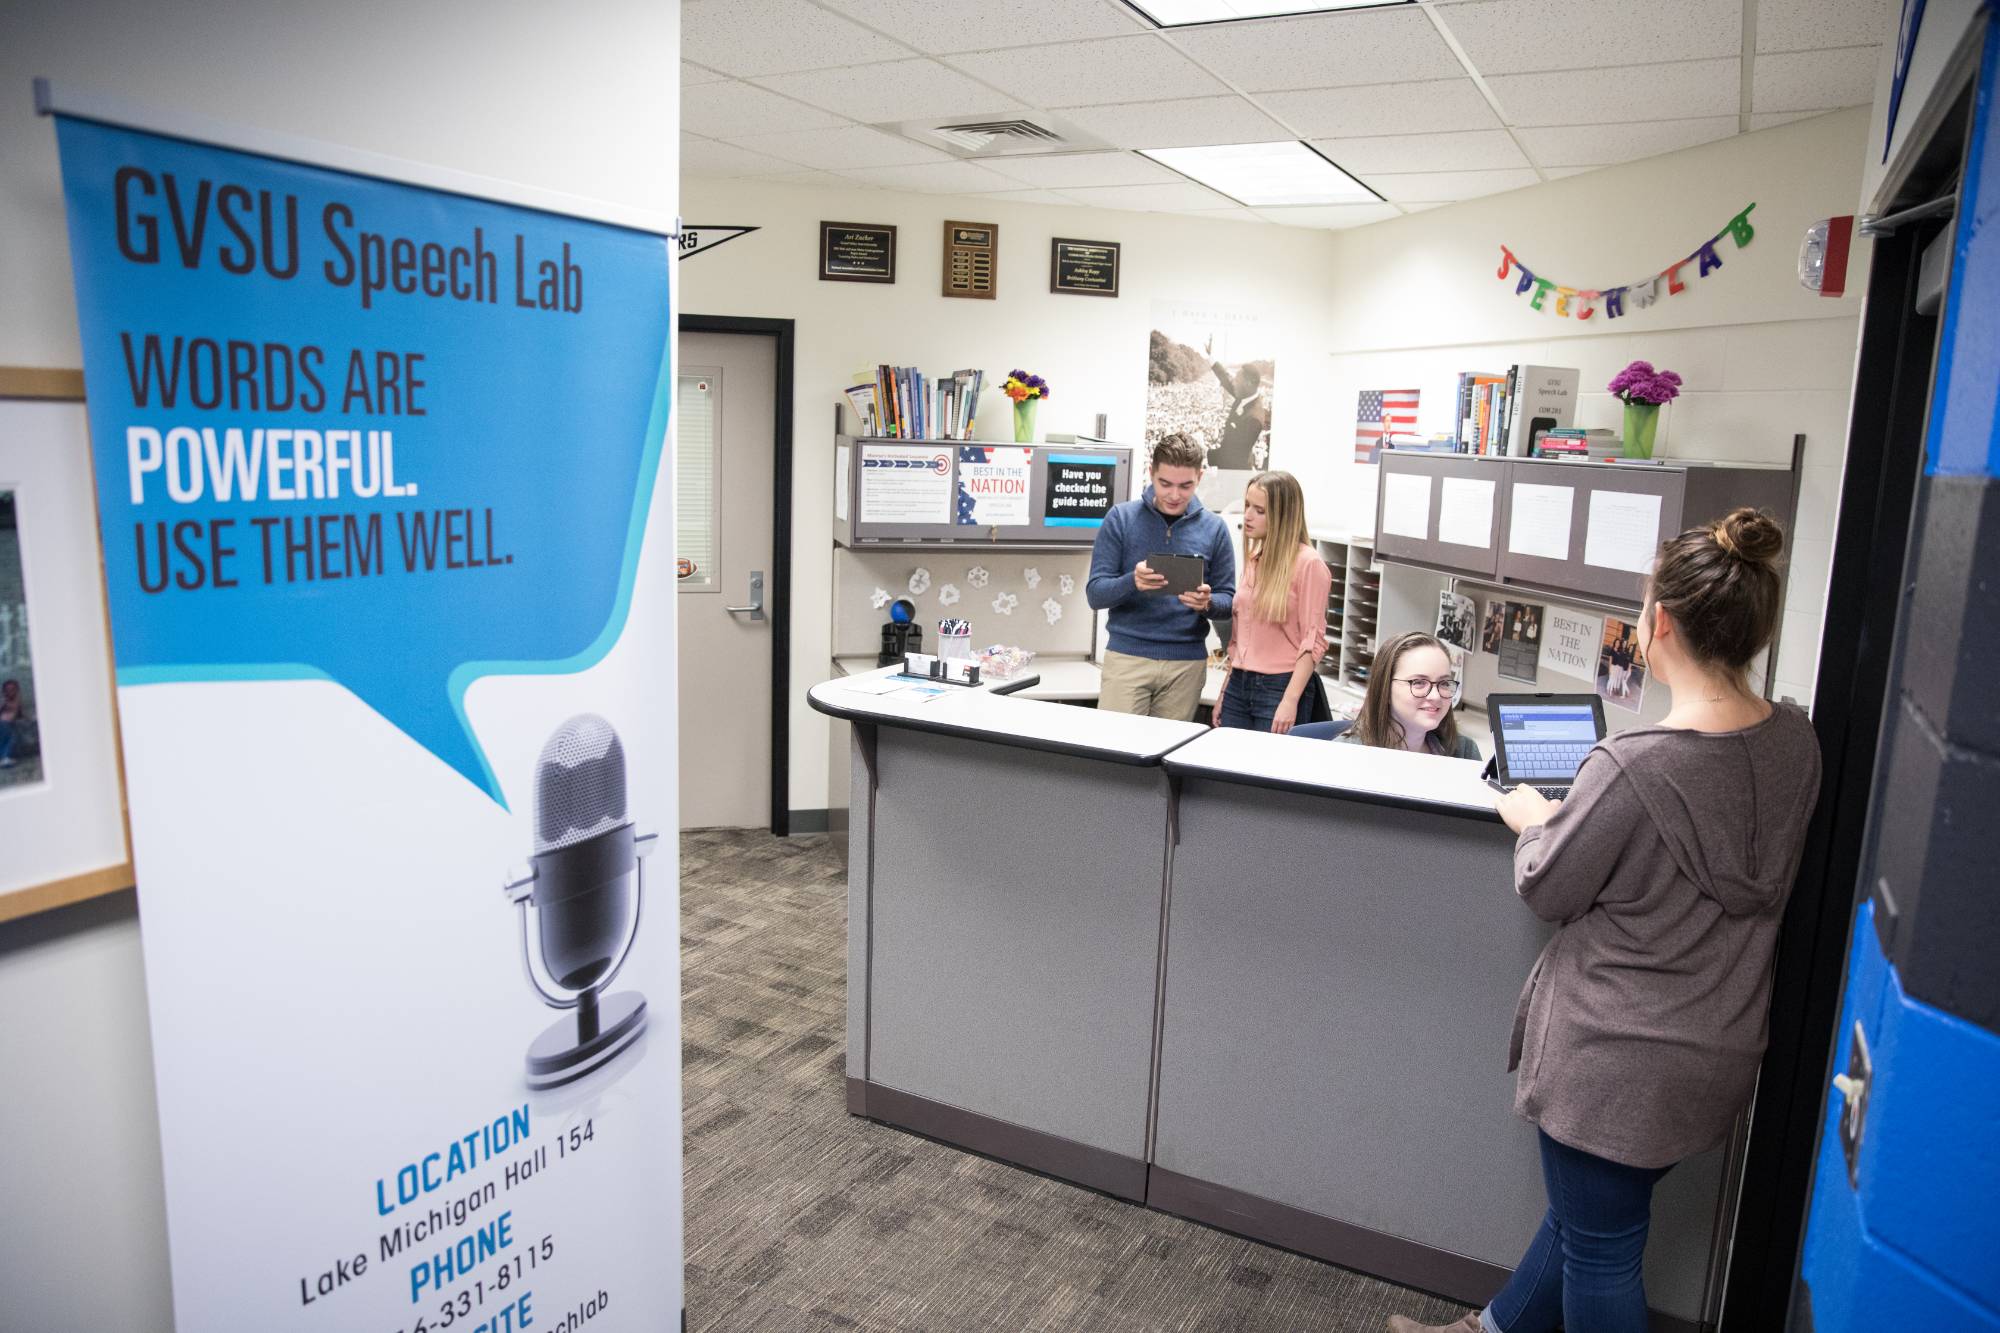 The GVSU Speech Lab can help you write speeches for courses